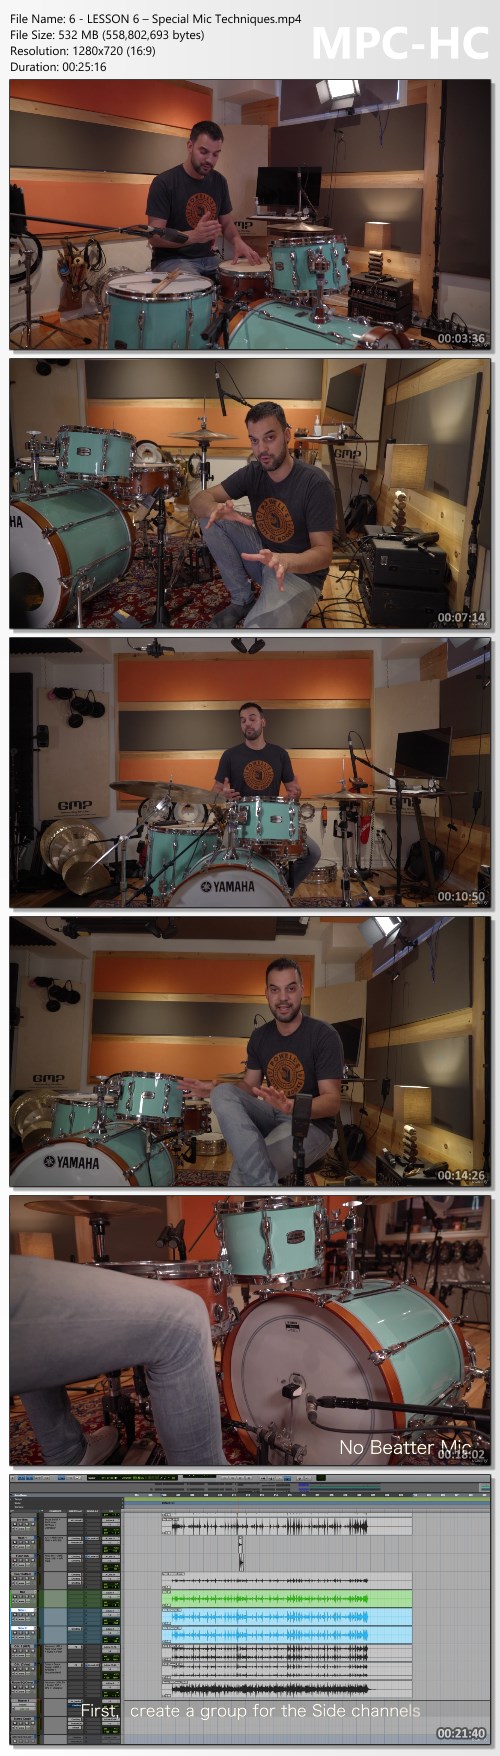 Session Drummer Masterclass - Complete by Marito Marques